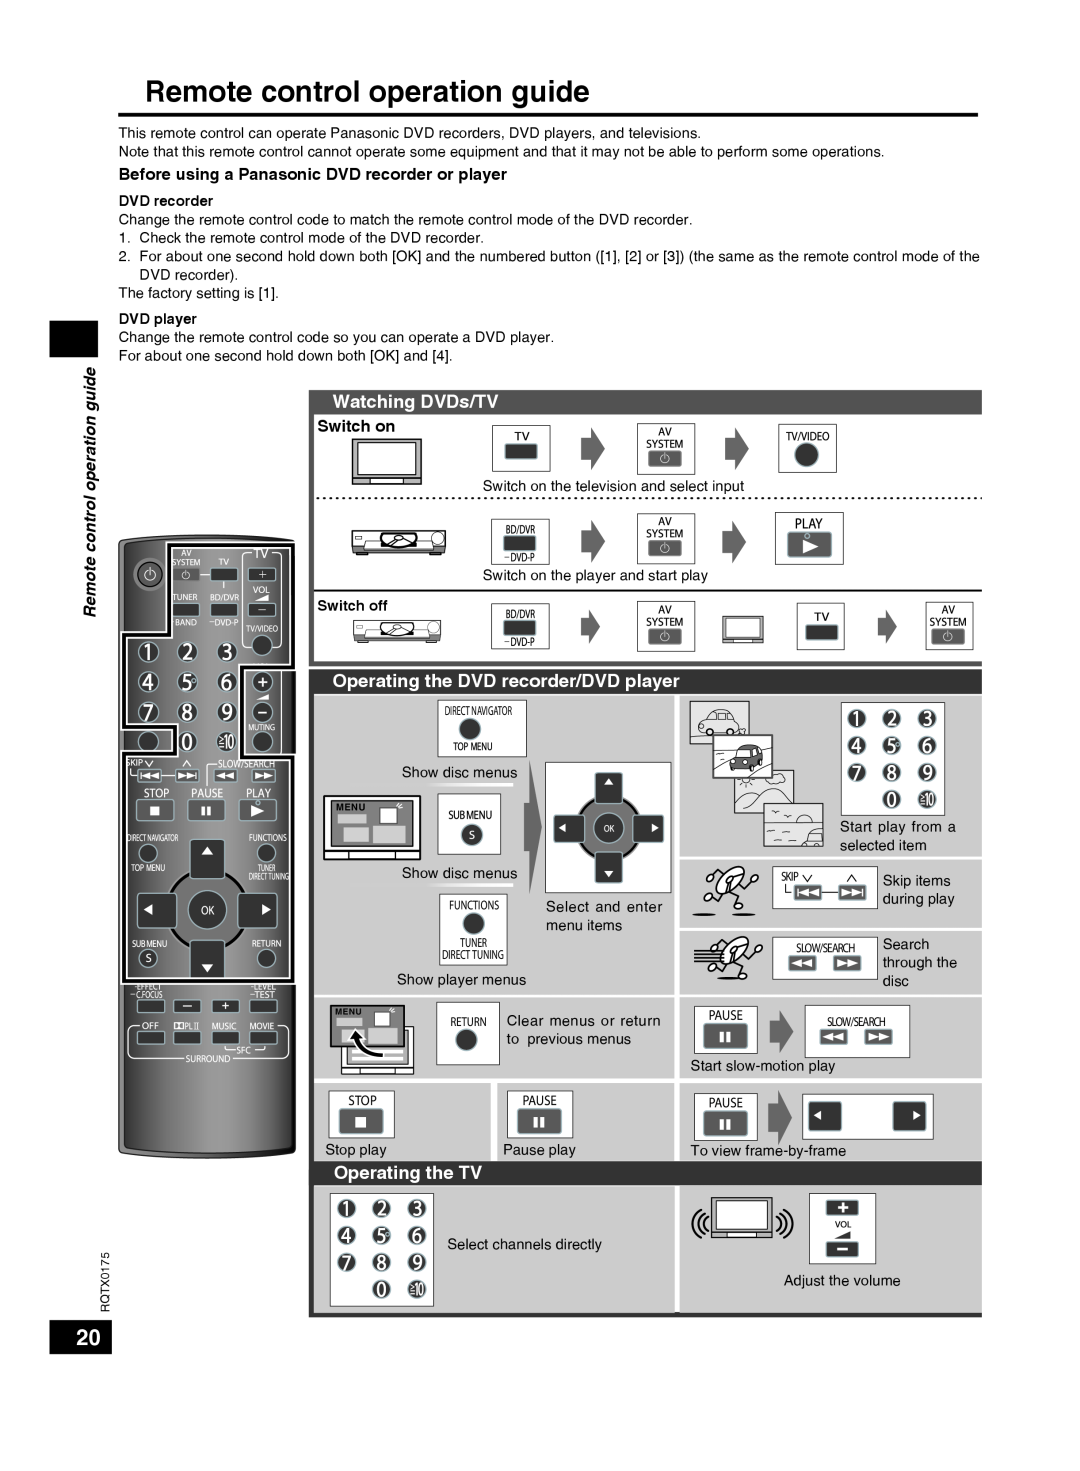 Panasonic SCHT56 Remote control operation guide, Watching DVDs/TV, Operating the DVD recorder/DVD player, Operating the TV 